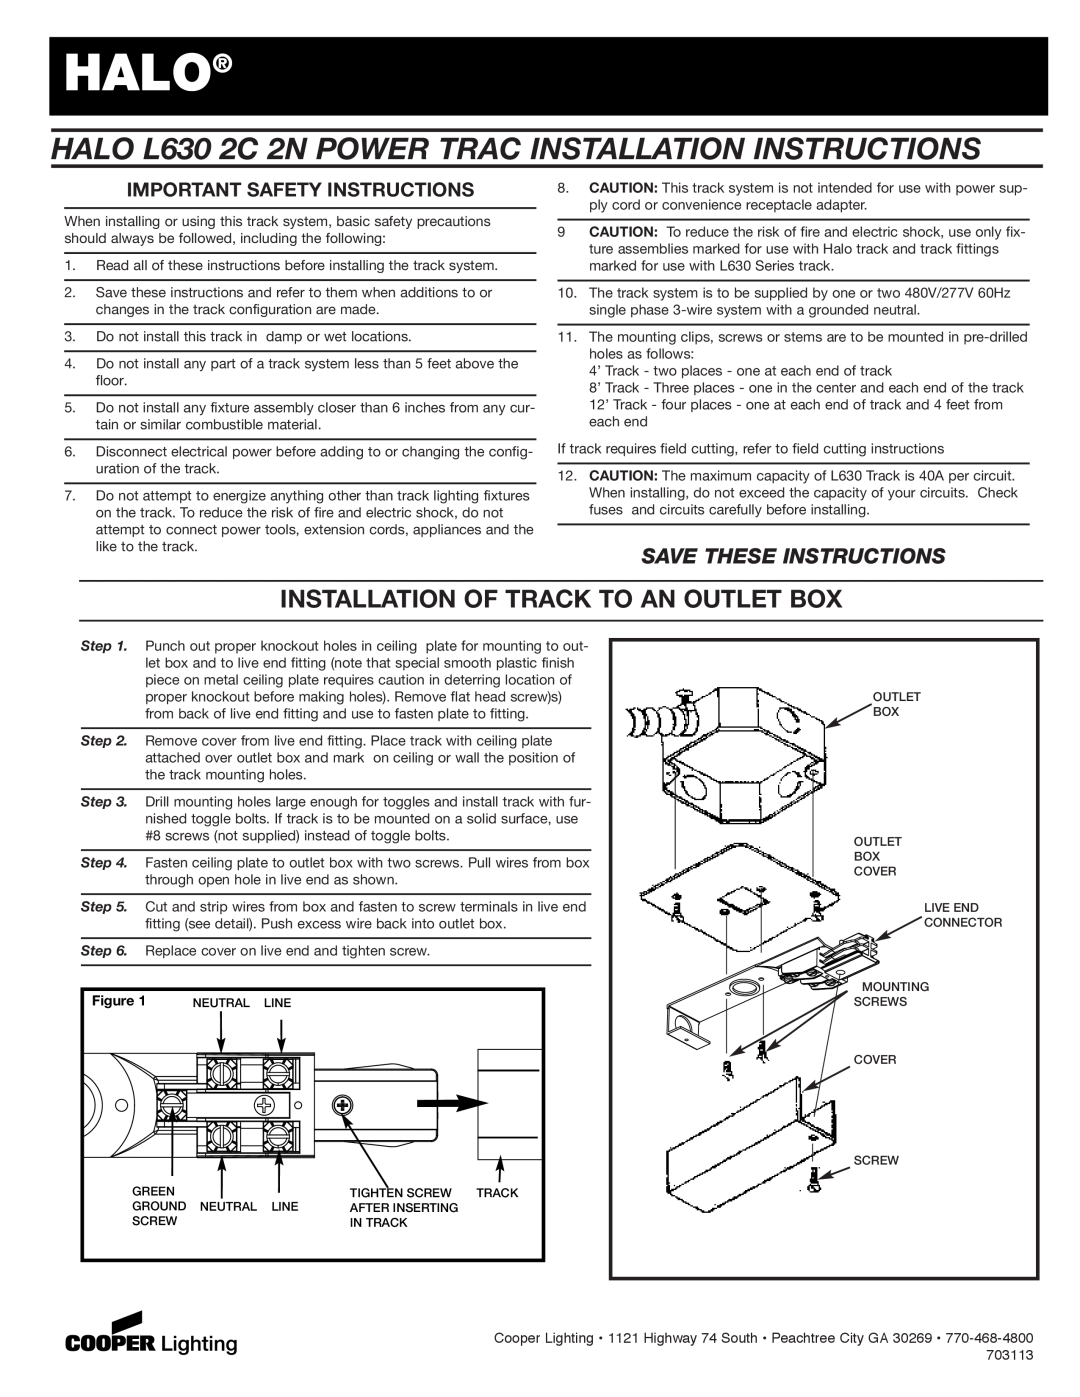 Cooper Lighting L630 2C 2N important safety instructions Installation Of Track To An Outlet Box, Save These Instructions 